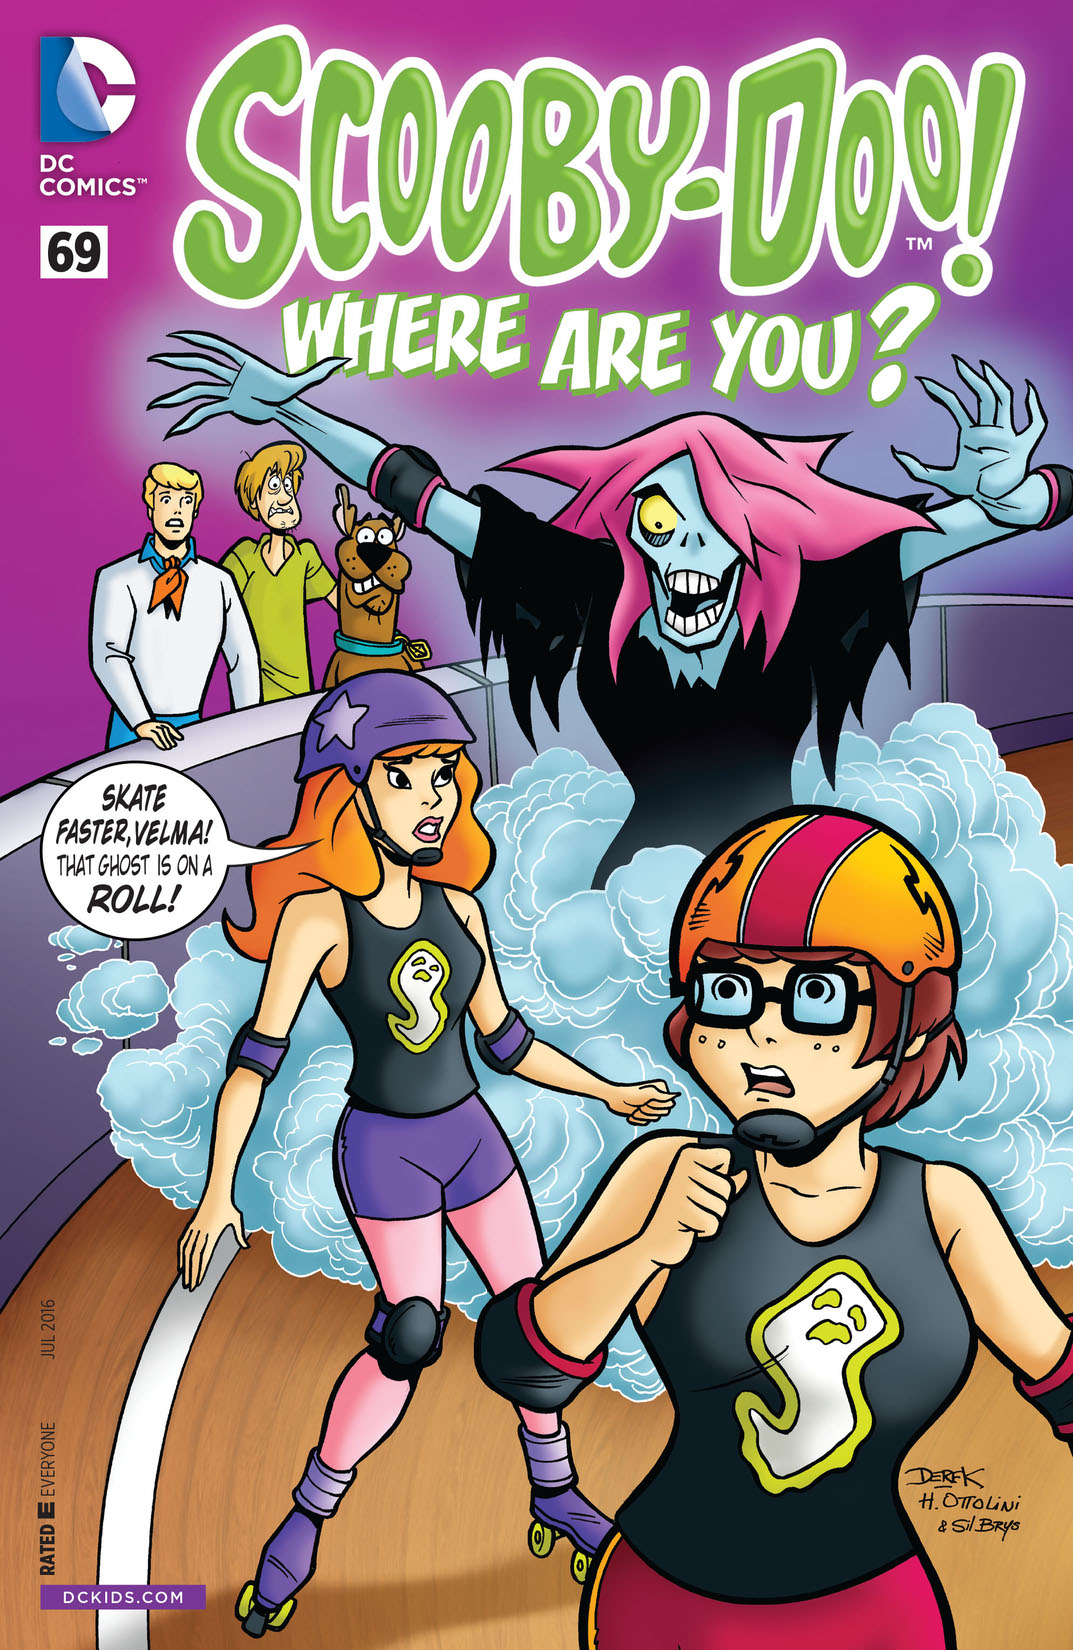 Scooby-Doo, Where Are You? #69 preview images